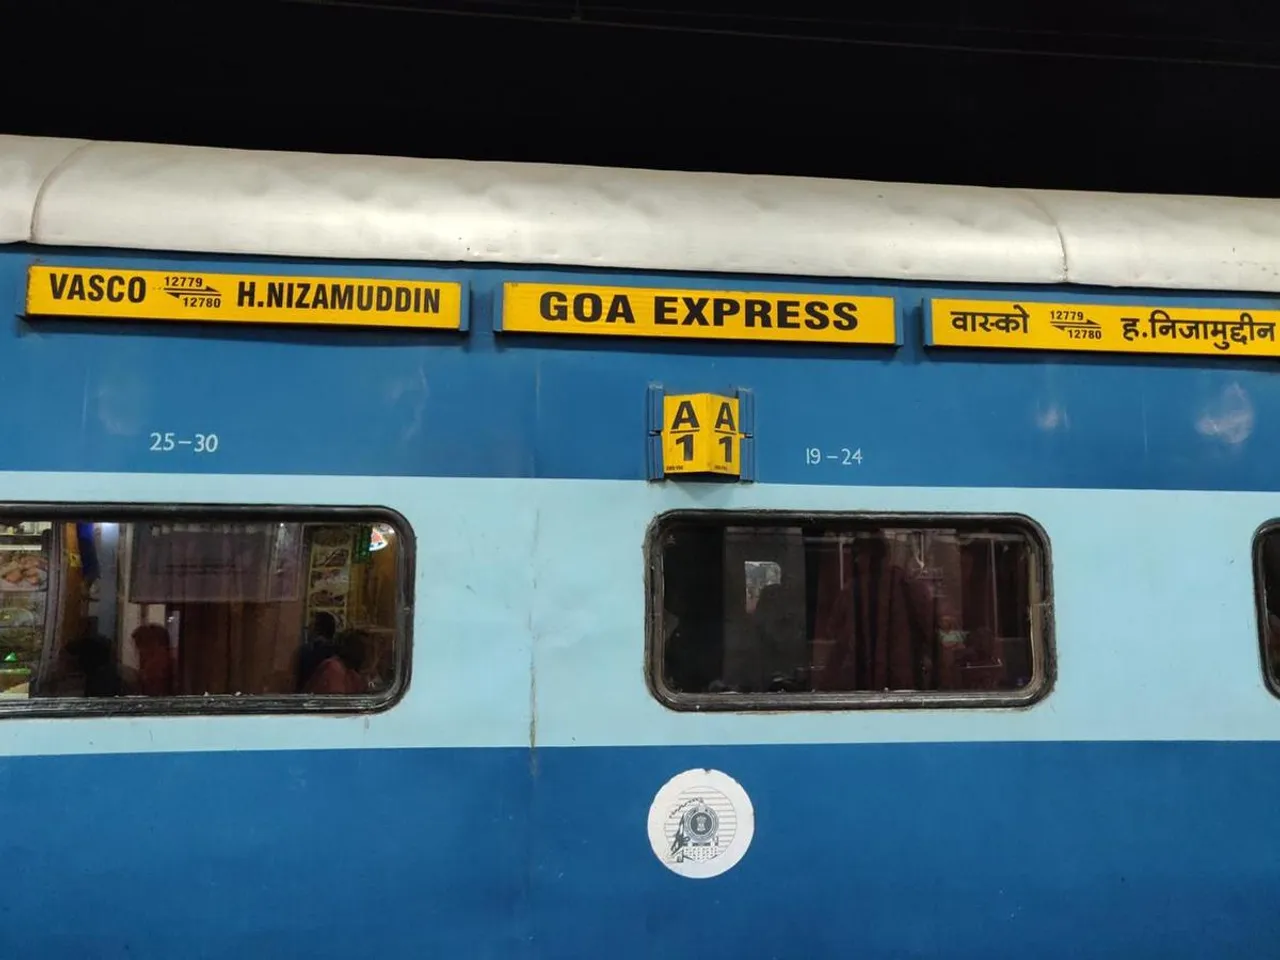 Goa Express leaves 45 passengers behind after arriving 90 minutes early, departing in five minutes